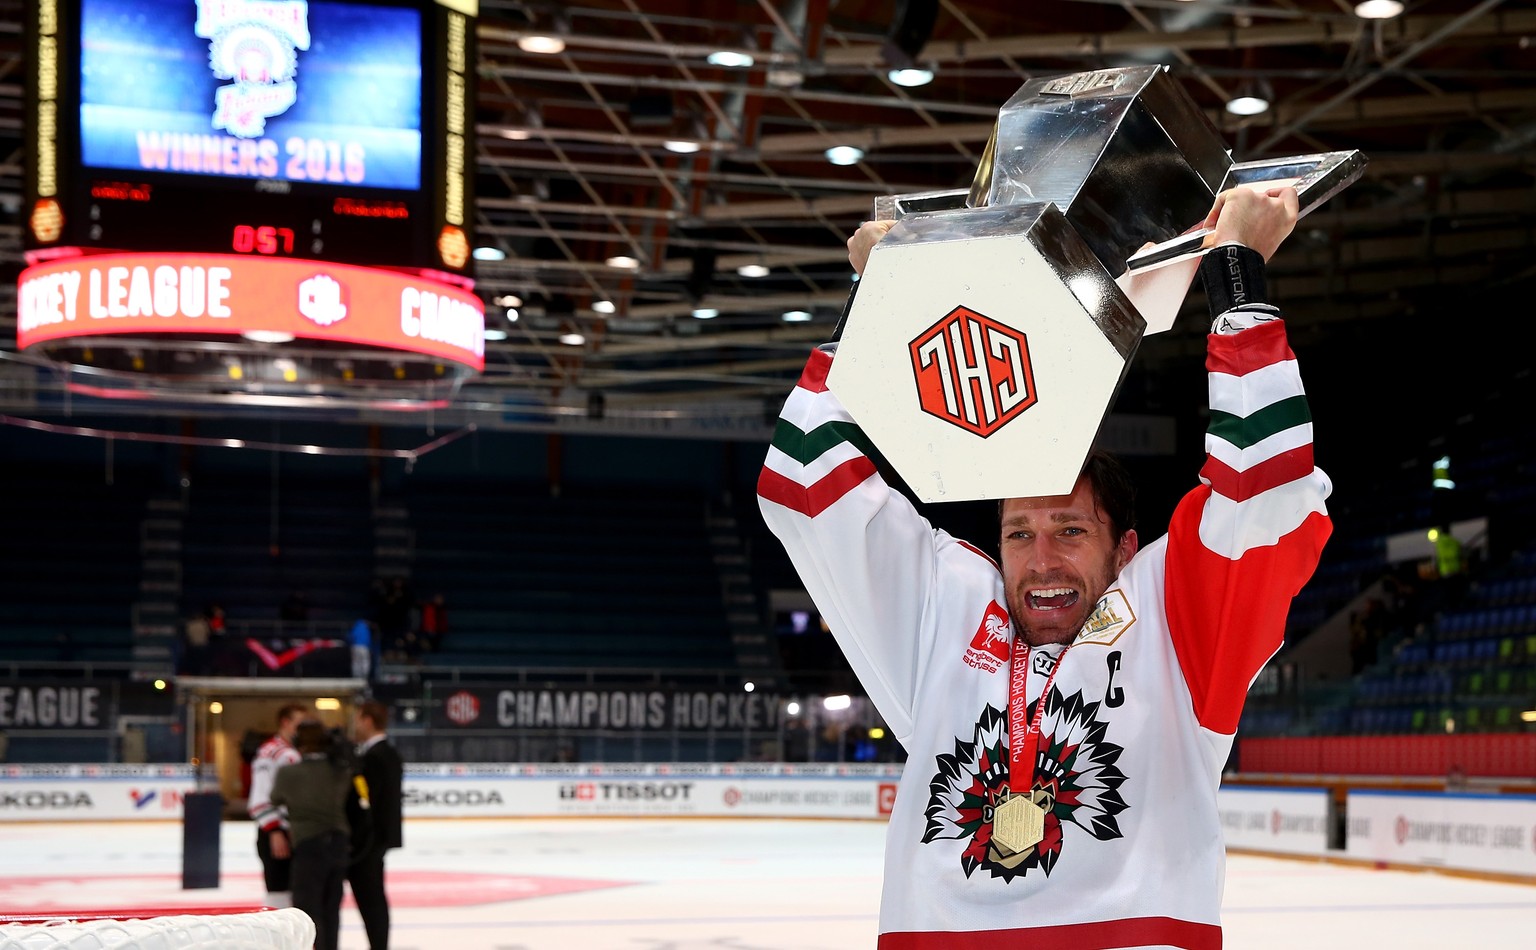 OULU, FINLAND - FEBRUARY 09: Joel Lundqvist of Gothenburg lifts the trophy after winning the Champions Hockey League final game between Karpat Oulu and Frolunda Gothenburg at Oulun Energia-Areena on F ...